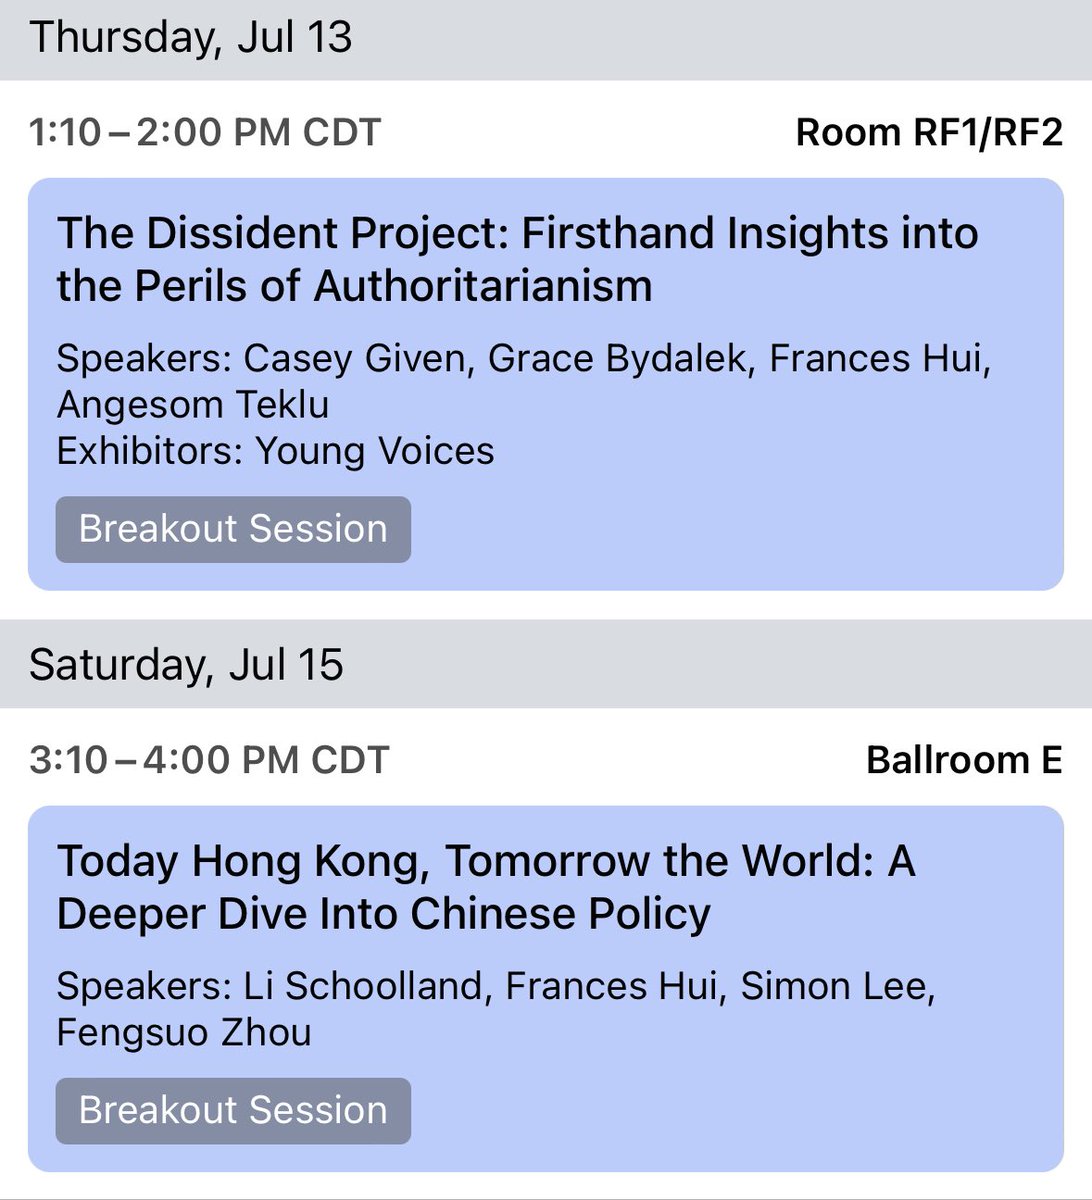 En route to Memphis for #FreedomFest2023! Can't wait to meet everyone soon and share more with my fellow freedom fighters on Hongkongers' movement for freedom. Thank you @DissidentProj and @thecfhk for making this amazing opportunity possible.